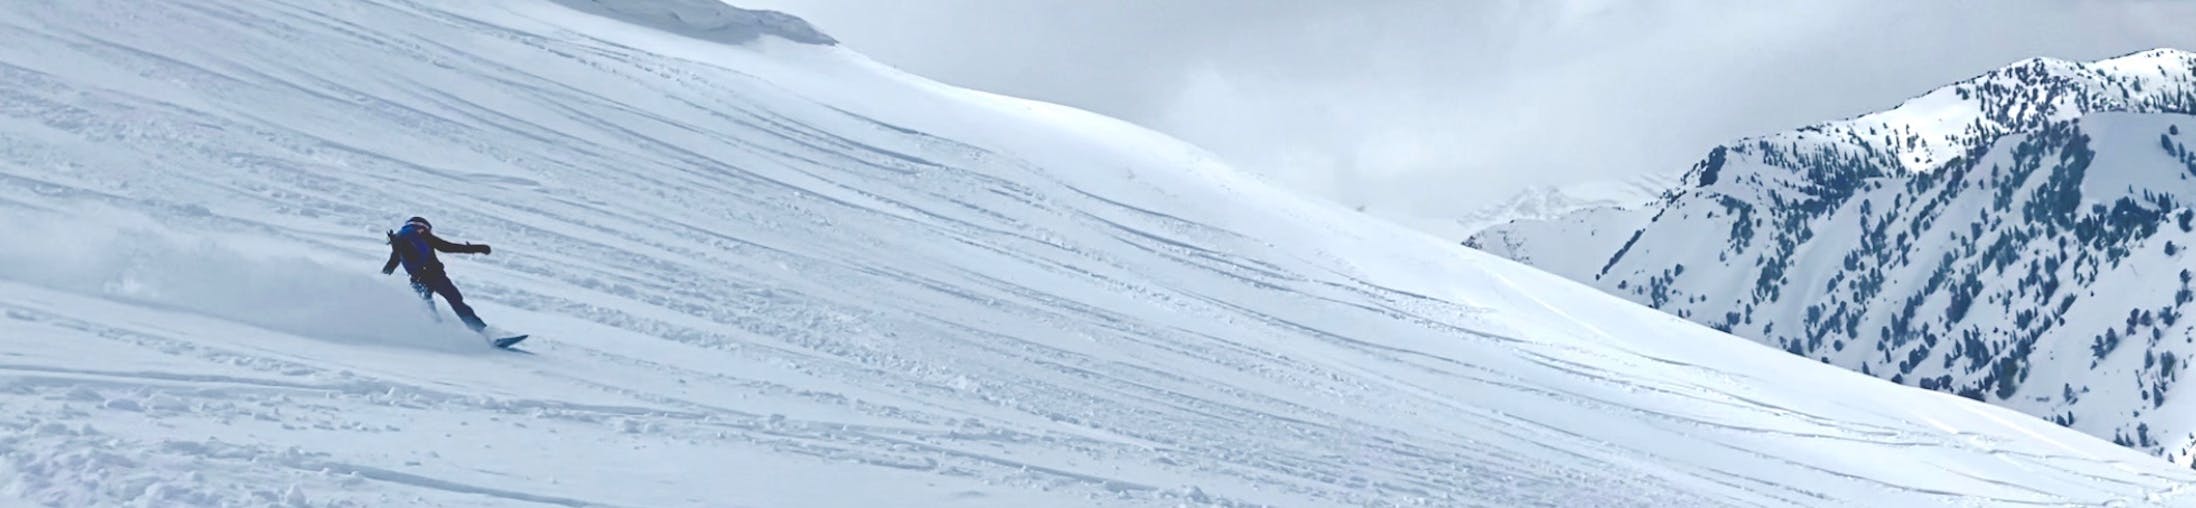 A woman on a snowboard turns down a peak. There are mountains in the background.